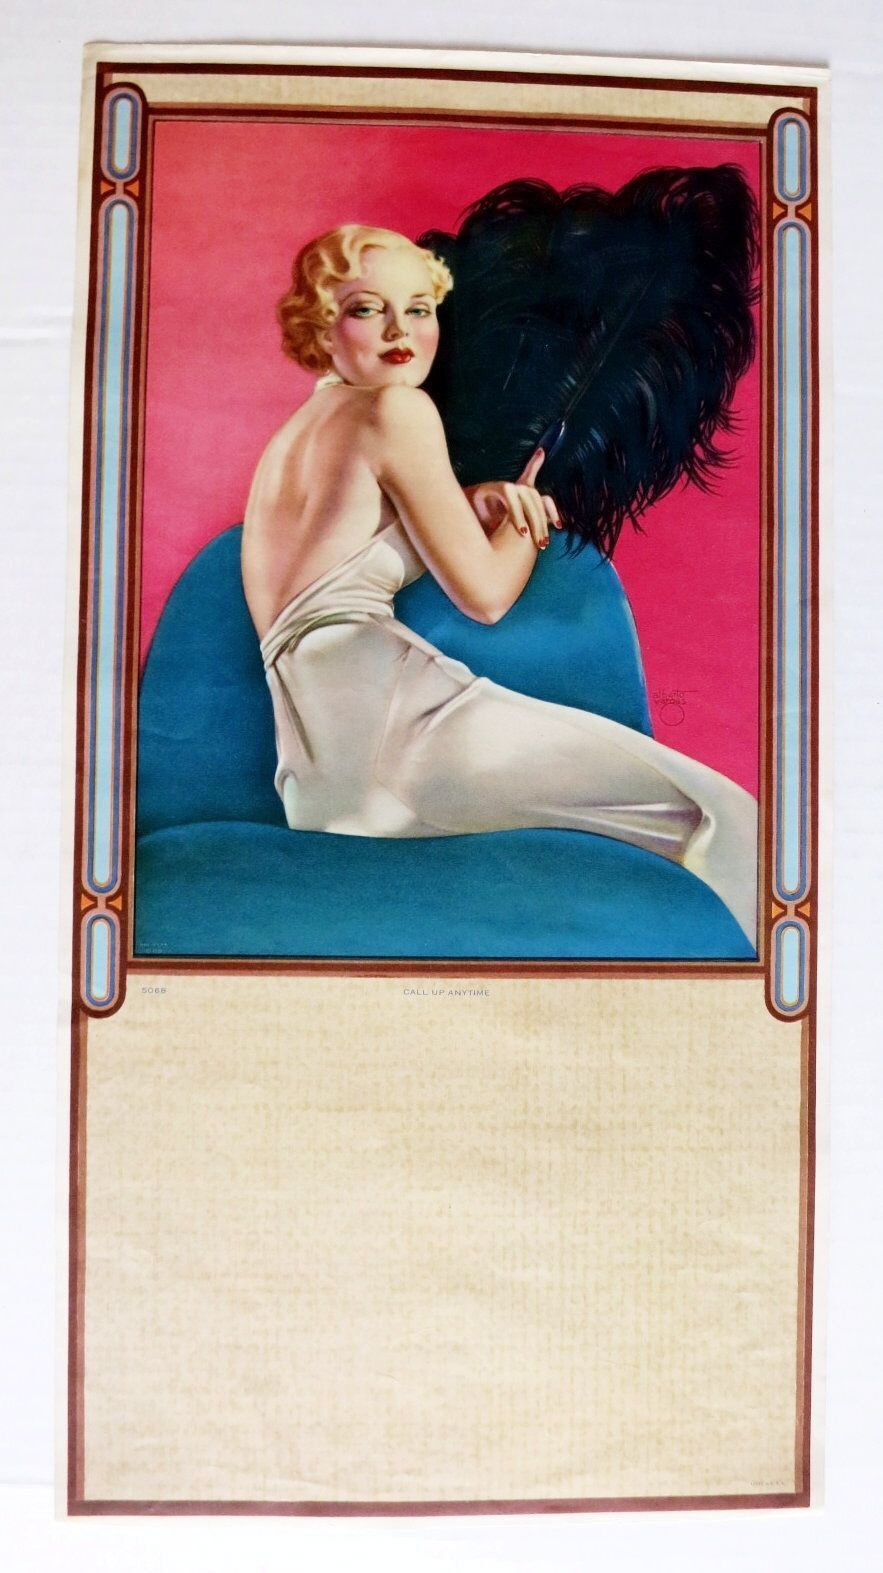 Vintage 1935 Alerto Vargas Pinup Picture Calendar Call Up Anytime